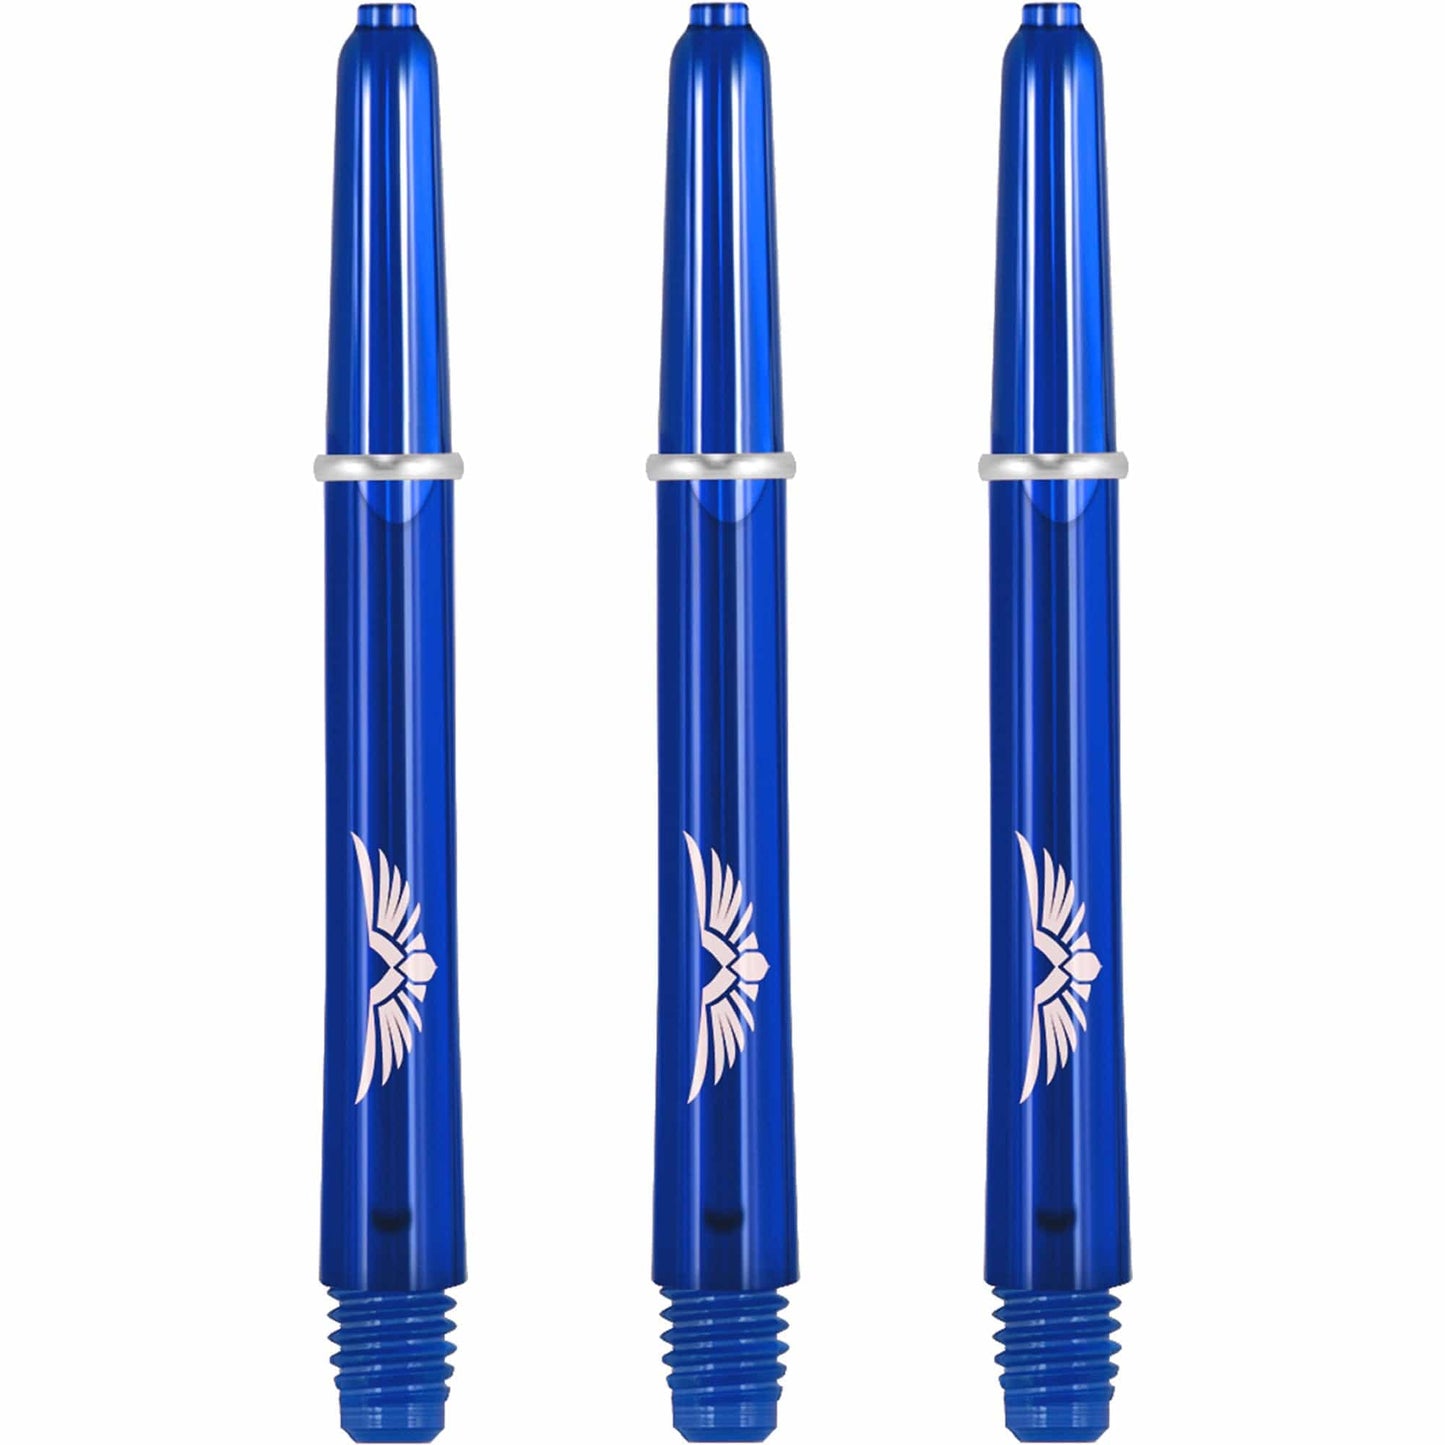 Shot Eagle Claw Dart Shafts - with Machined Rings - Strong Polycarbonate Stems - Blue Medium